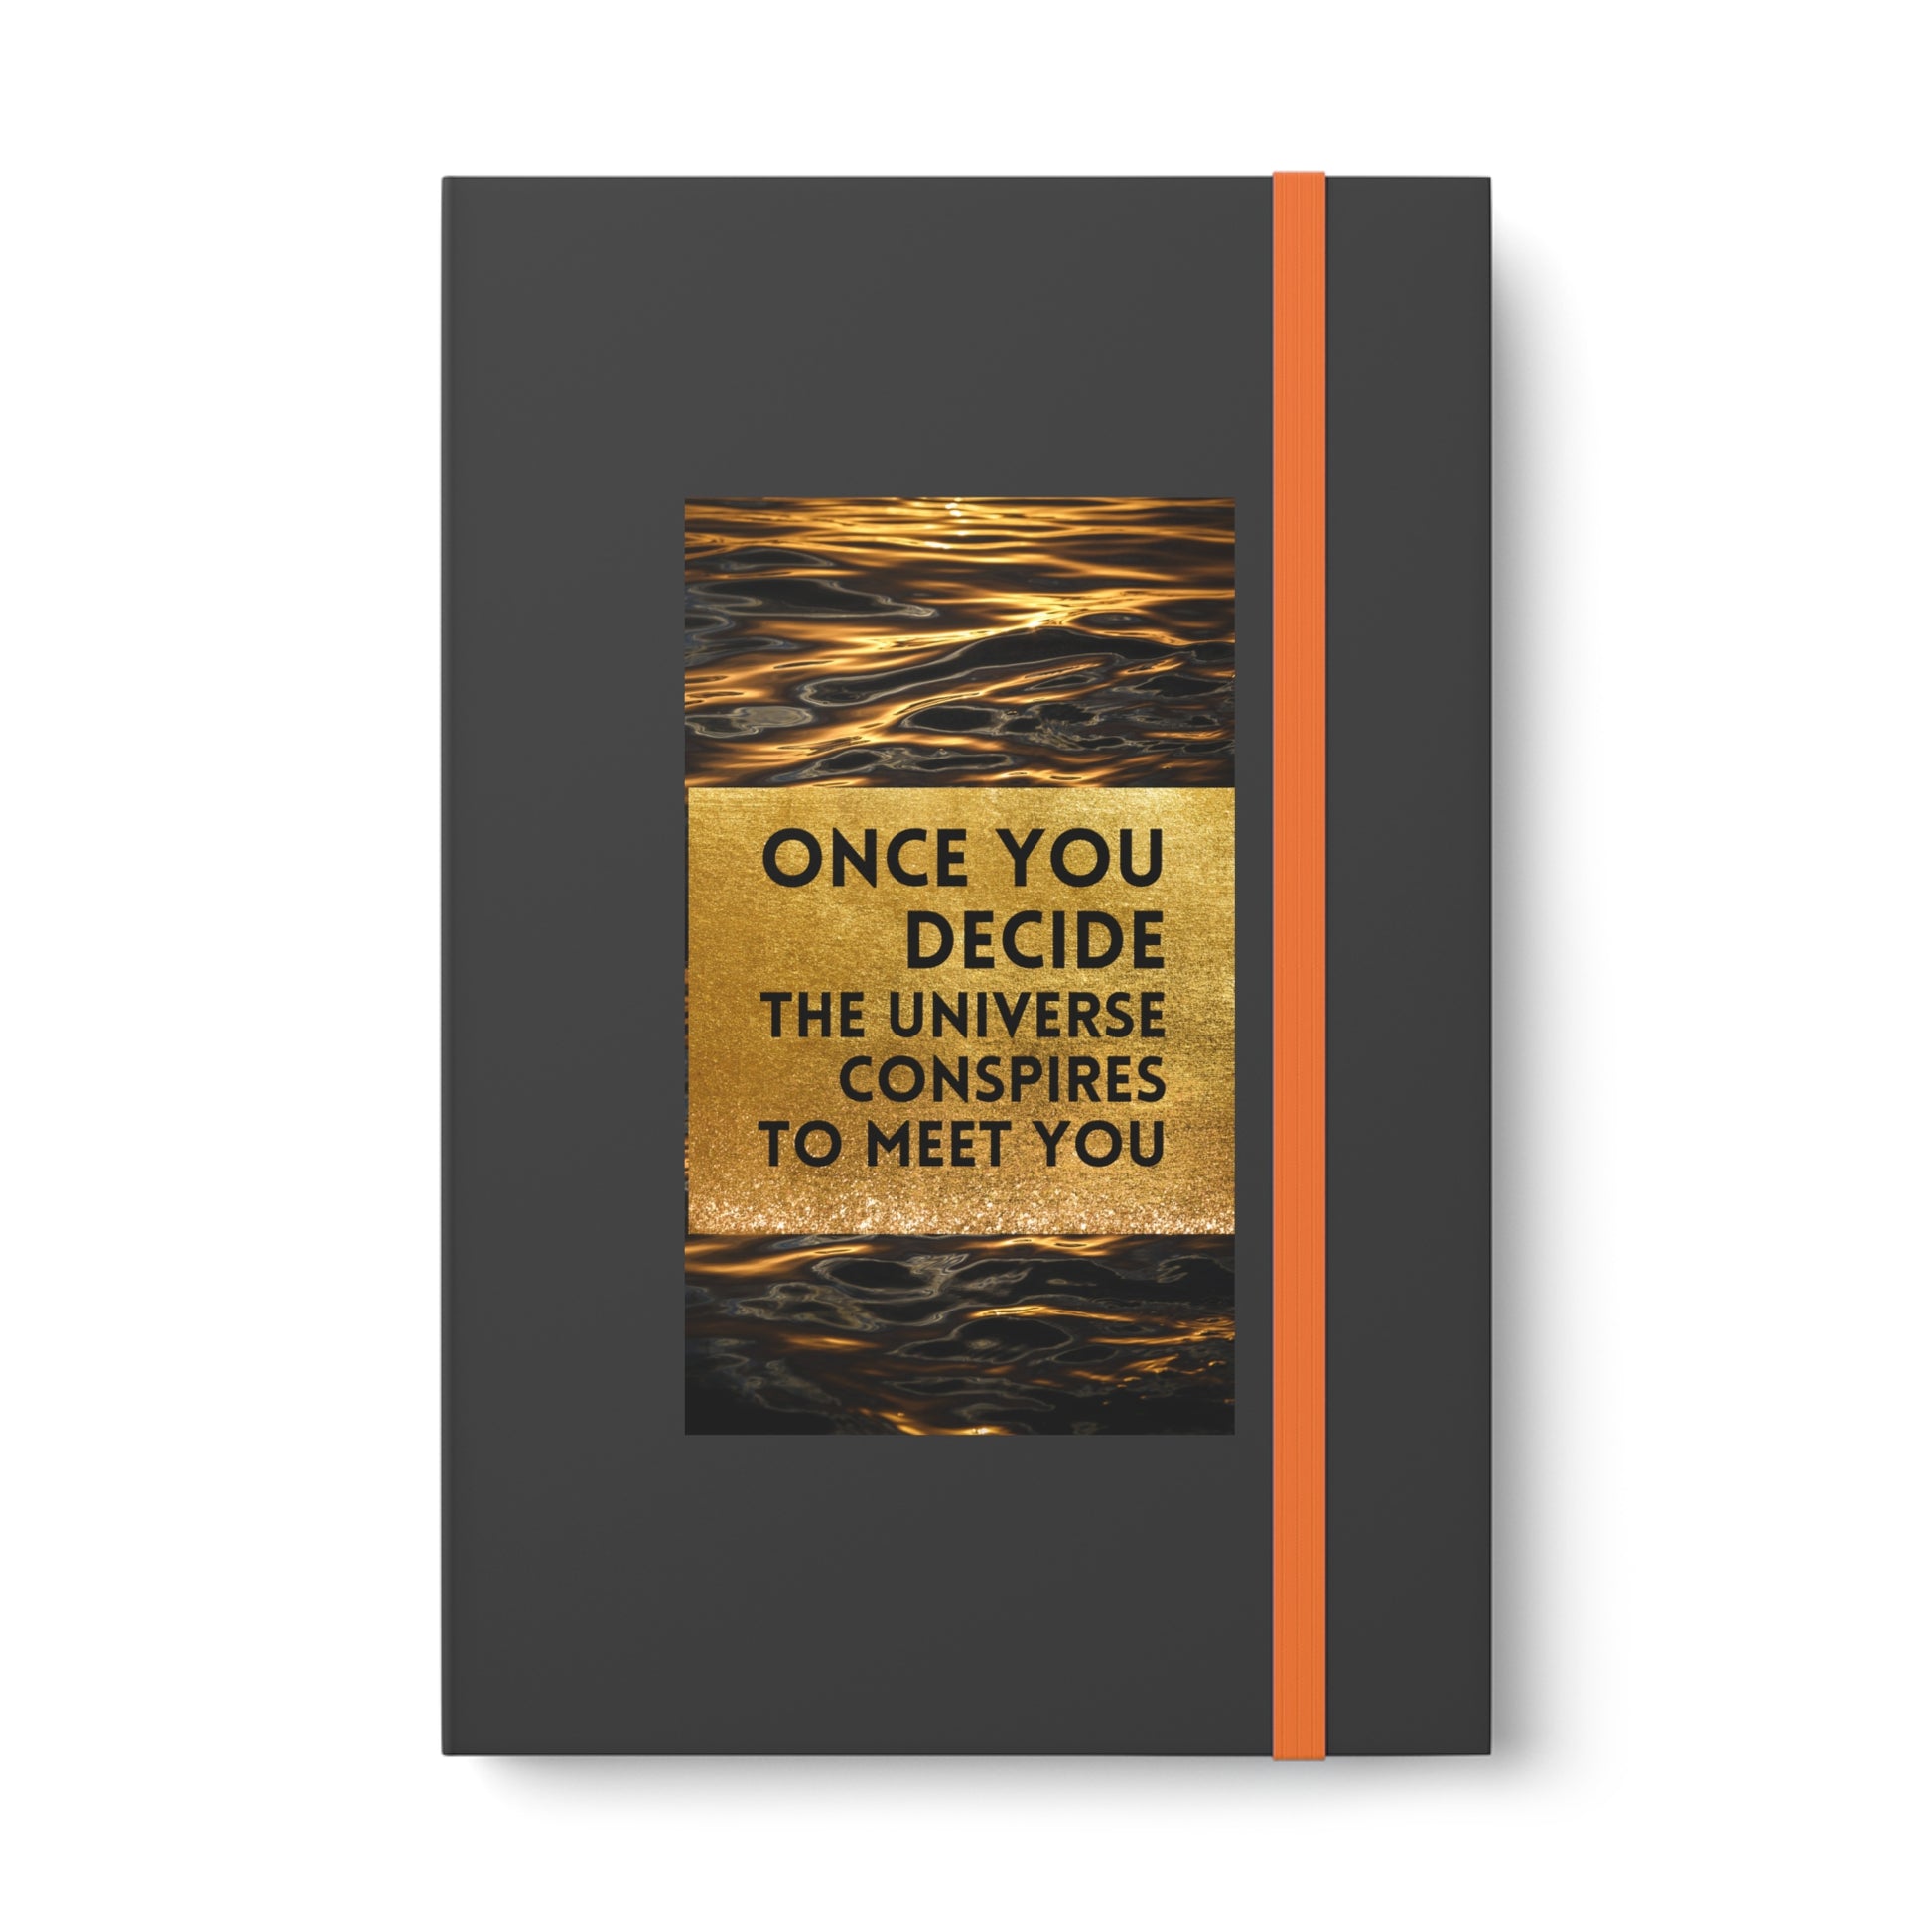 "Once You Decide, The Universe Aligns" - Spiral Notebook for Dreamers and Doers - 689 Designs